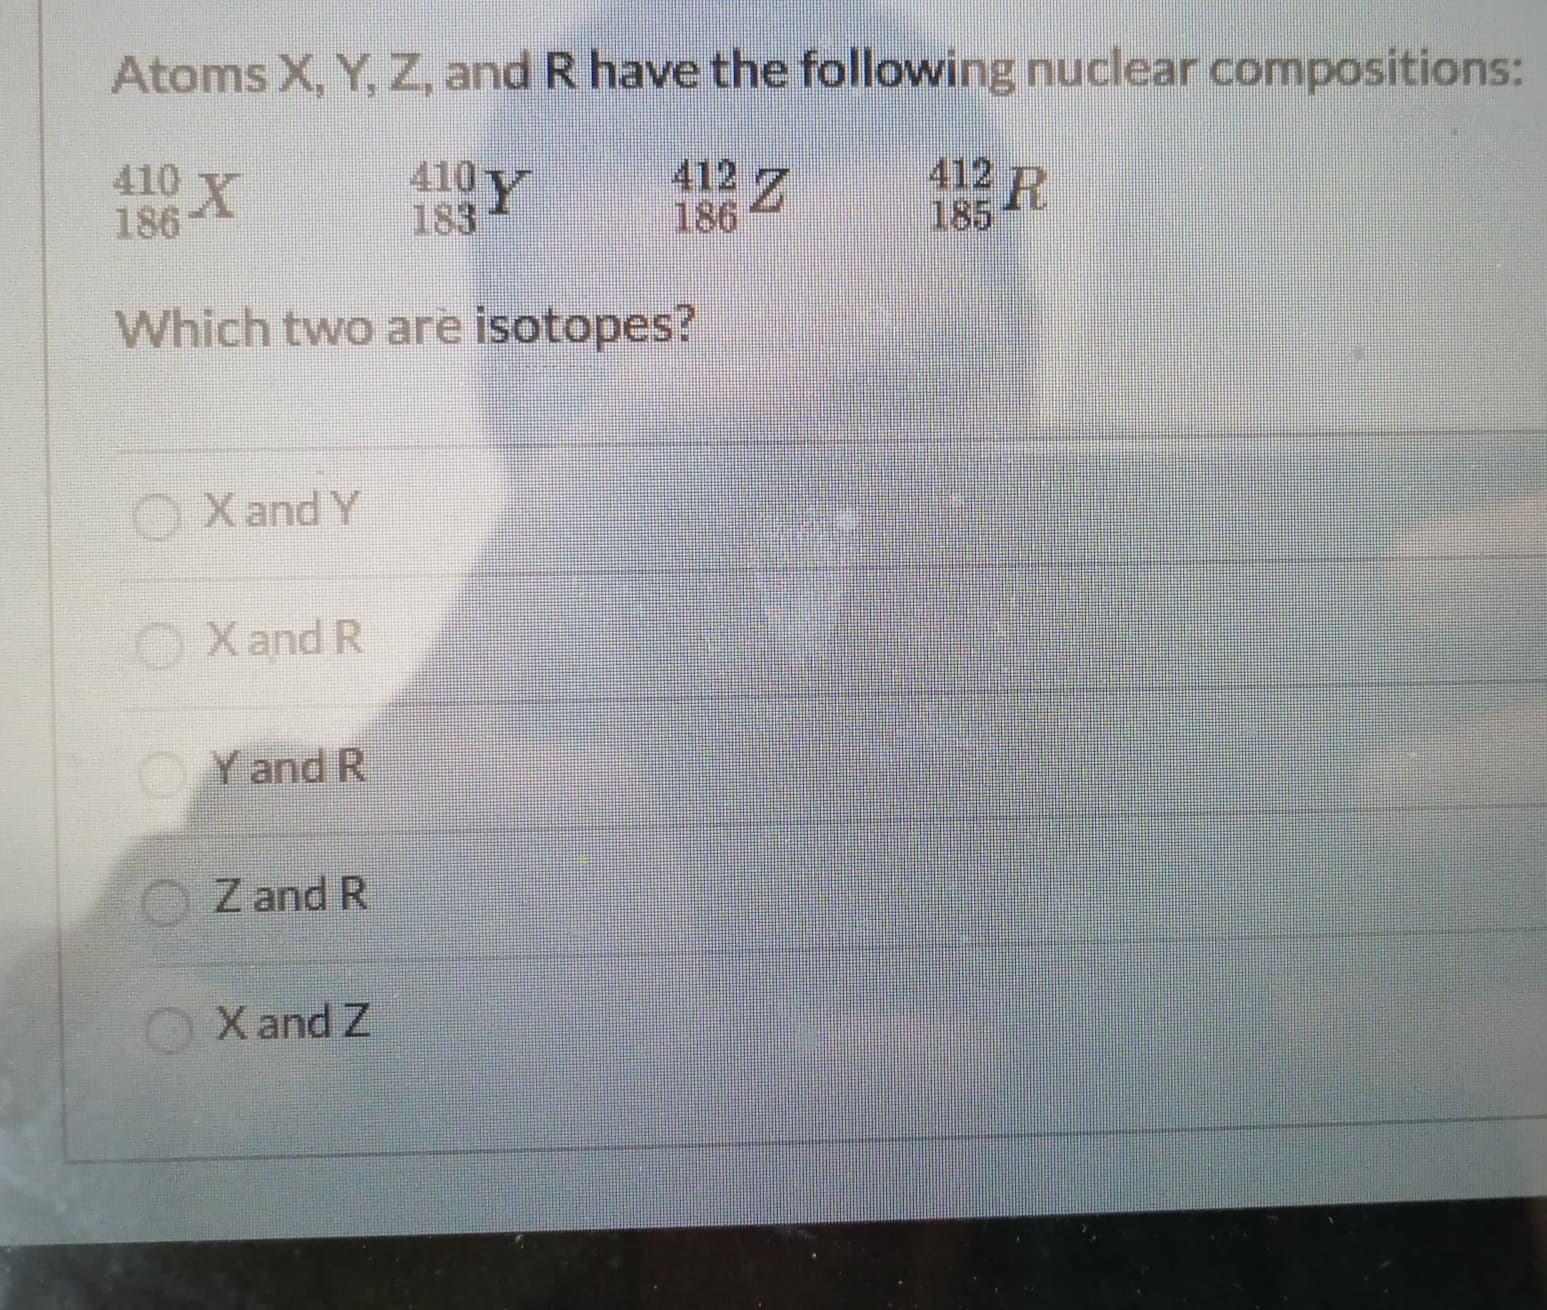 Atoms X, Y, Z, and R have the following nuclear compositions:
410 X
186
410Y
183
412 Z
186
412 p
185
Which two are isotopes?
O
X and Y
OXand R
OYand R
Z and R
X and Z
